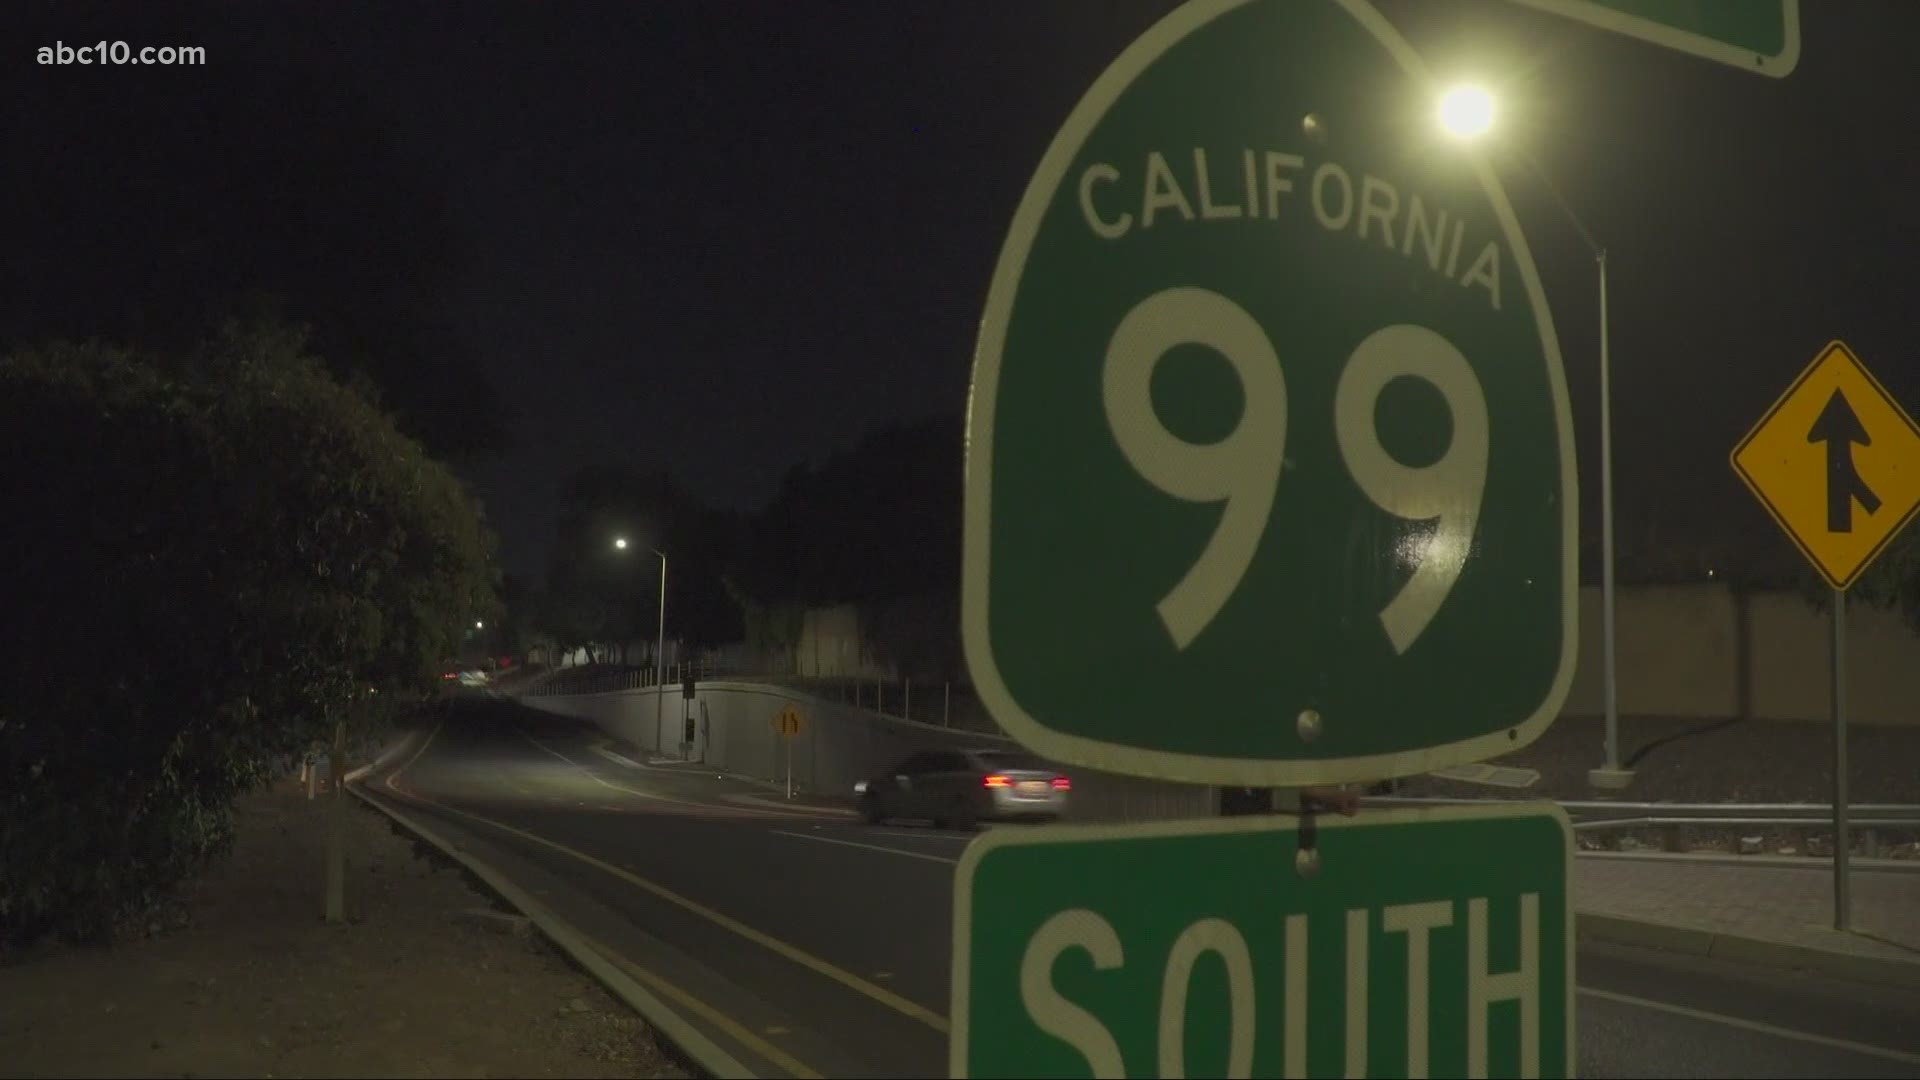 Sacramento-area commuters beware, a portion of Highway 99 is shutting down for 4 days, starting June 11 at 8 p.m.